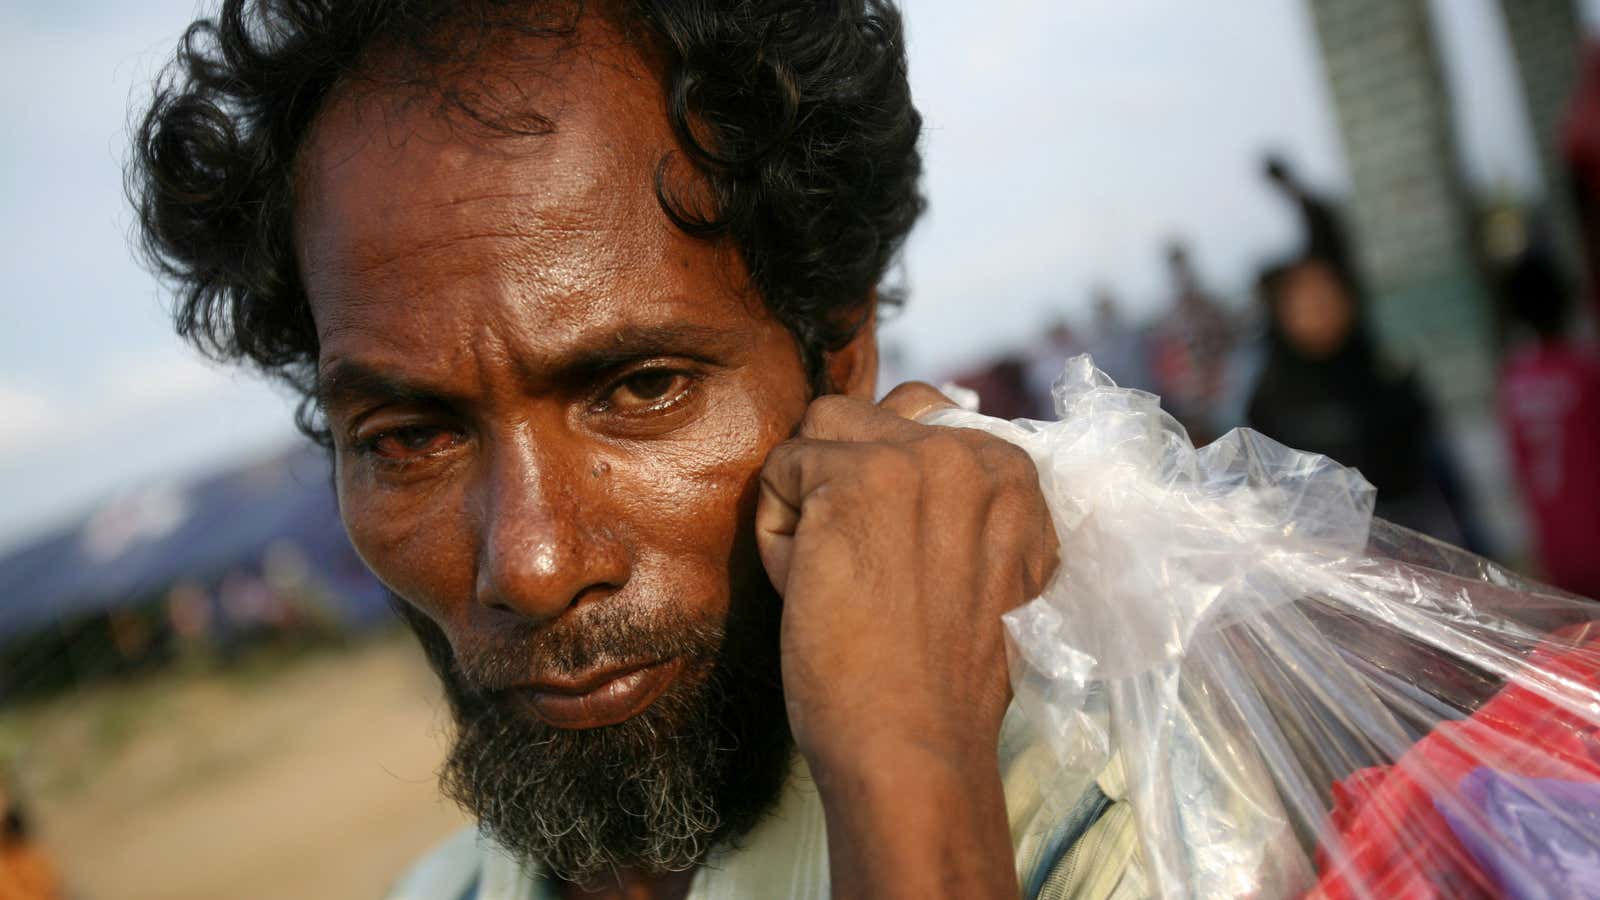 An ethnic Rohingya man carries a plastic bag containing his belongings at a temporary shelter in Lapang, Aceh province, Indonesia.